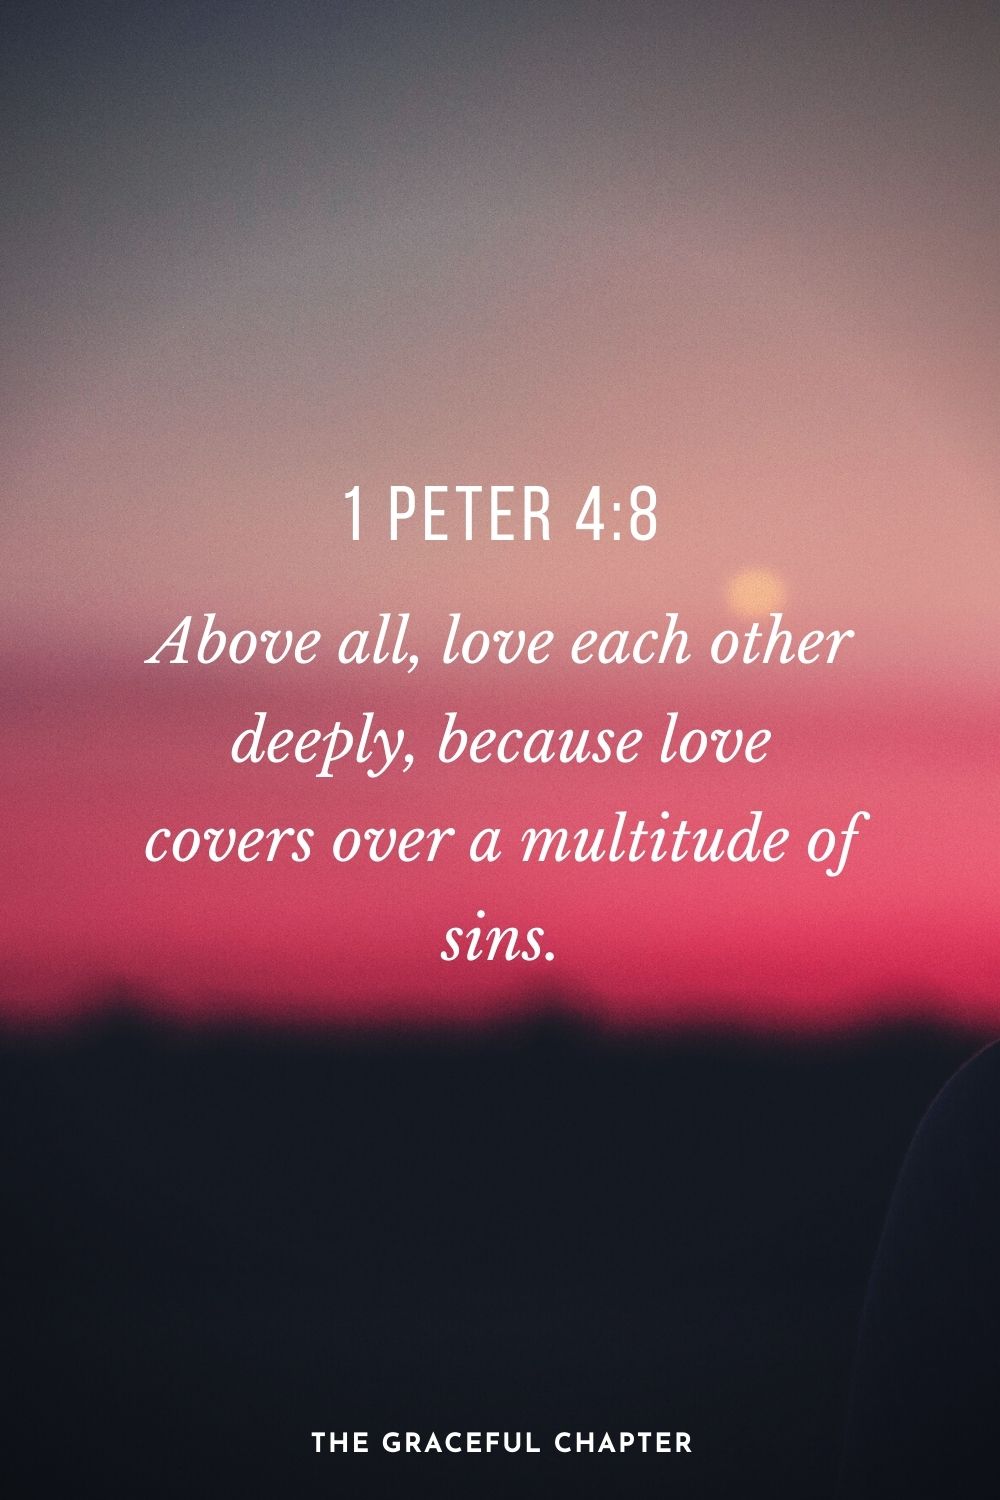 Above all, love each other deeply, because love covers over a multitude of sins. 1 Peter 4:8